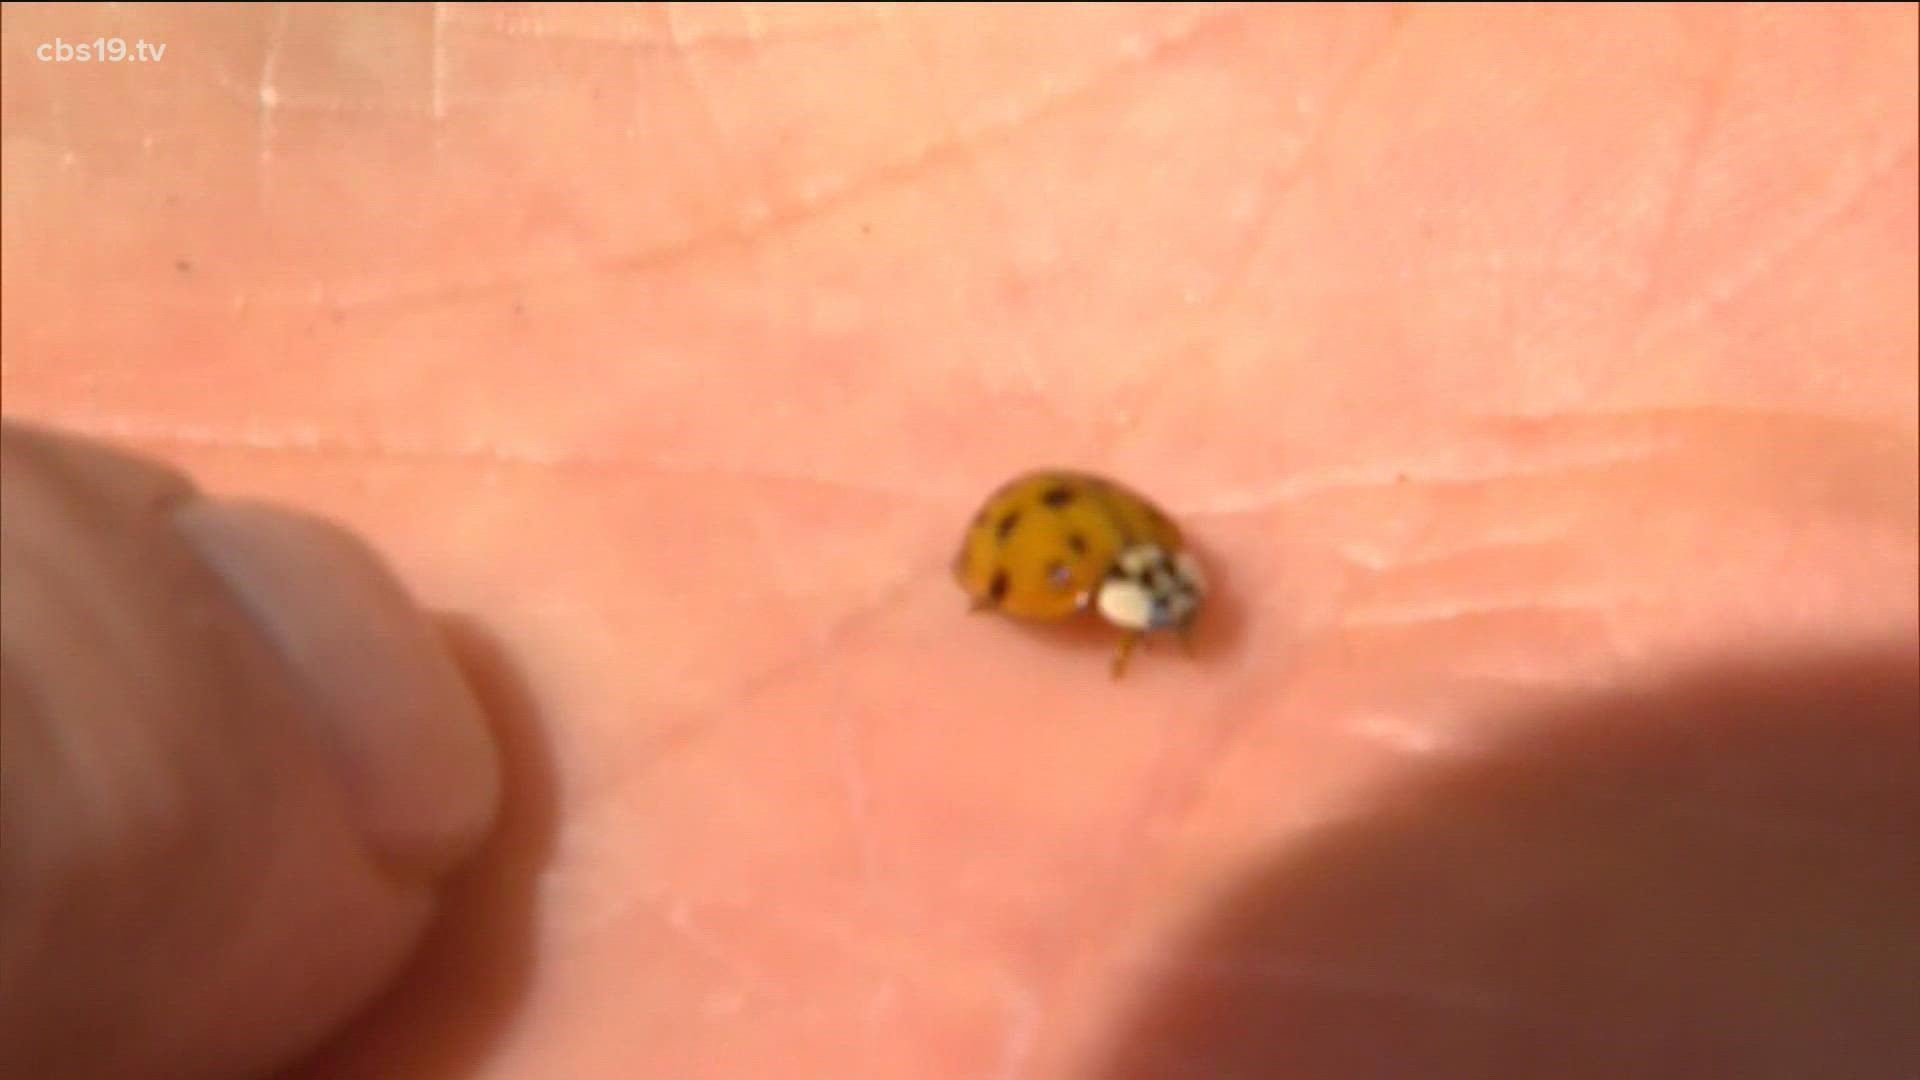 Asian Lady Bugs creeping up in East Texas homes